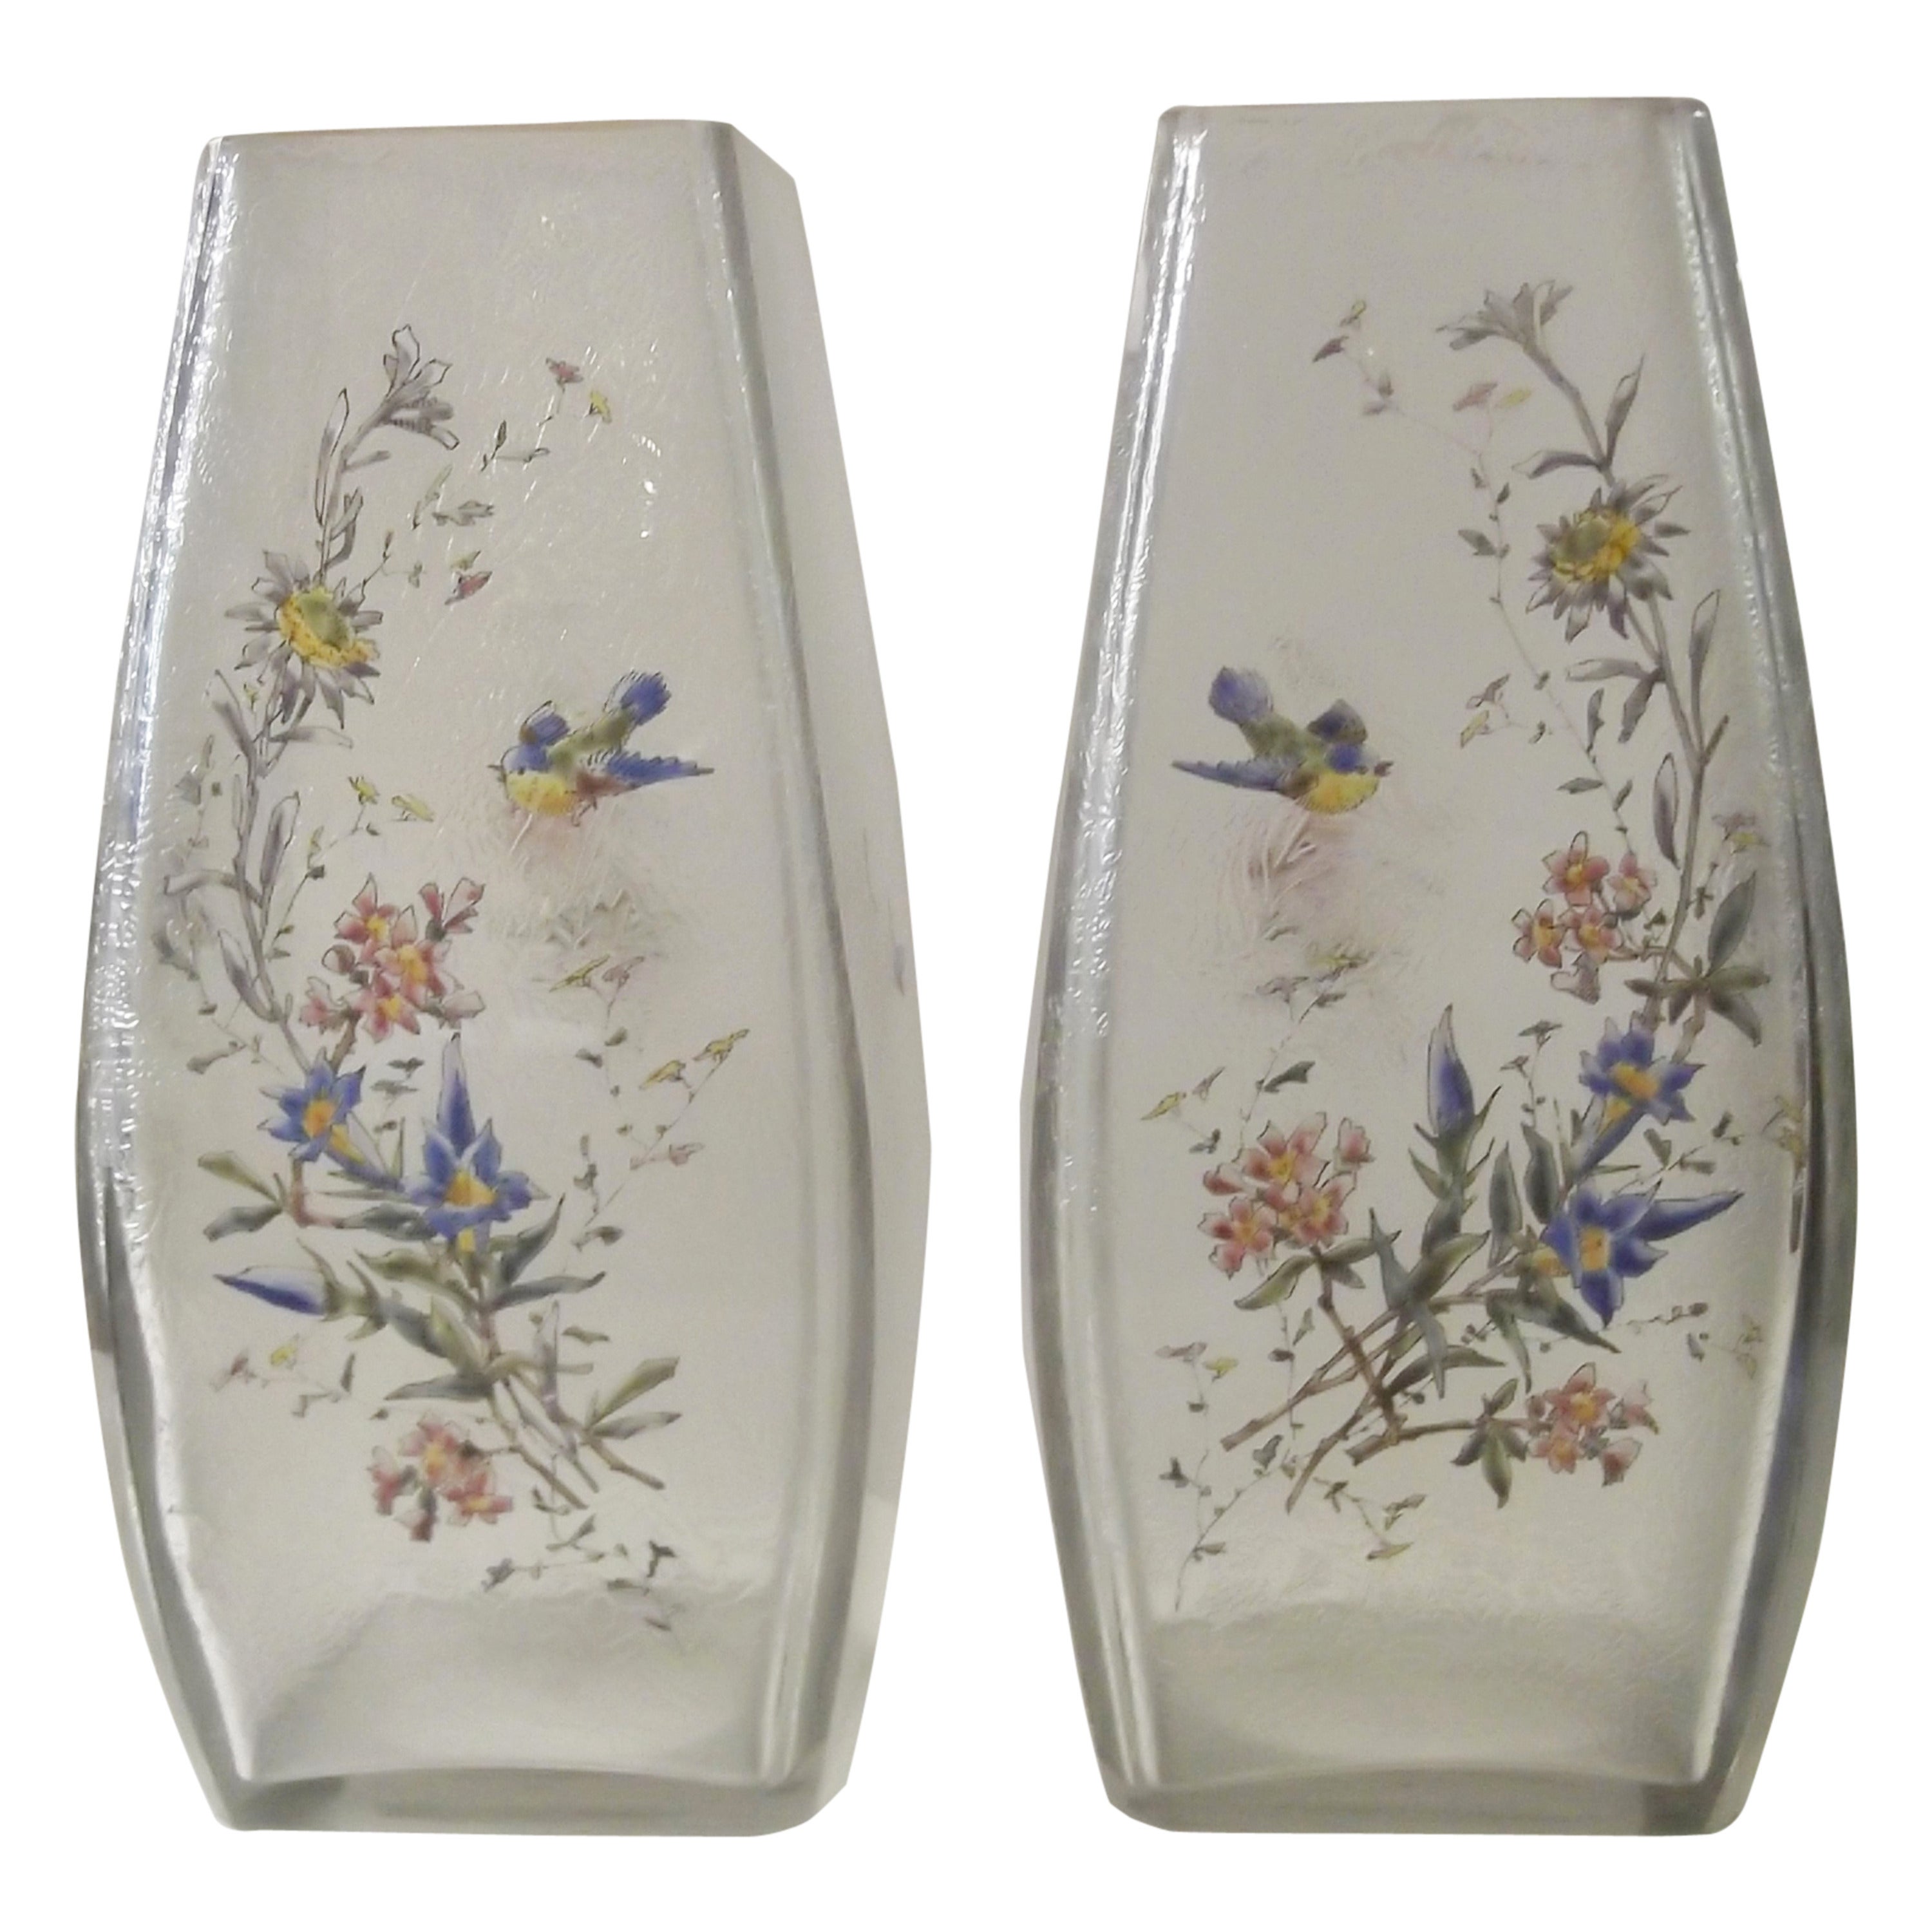 Pair of French Mount Joye Hand-Enameled Etched Glass Vases